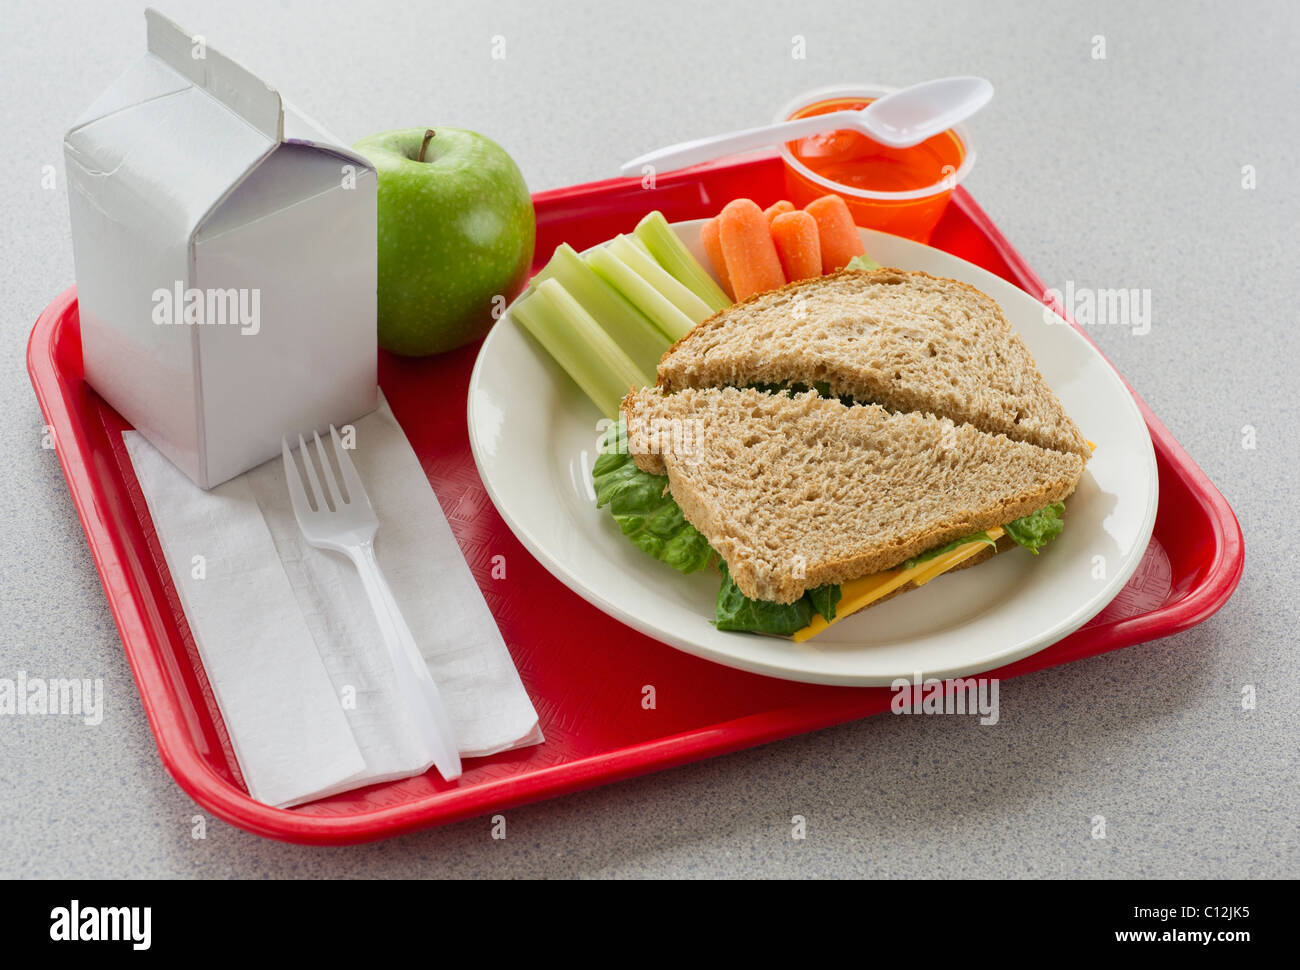 School lunch on tray Stock Photo